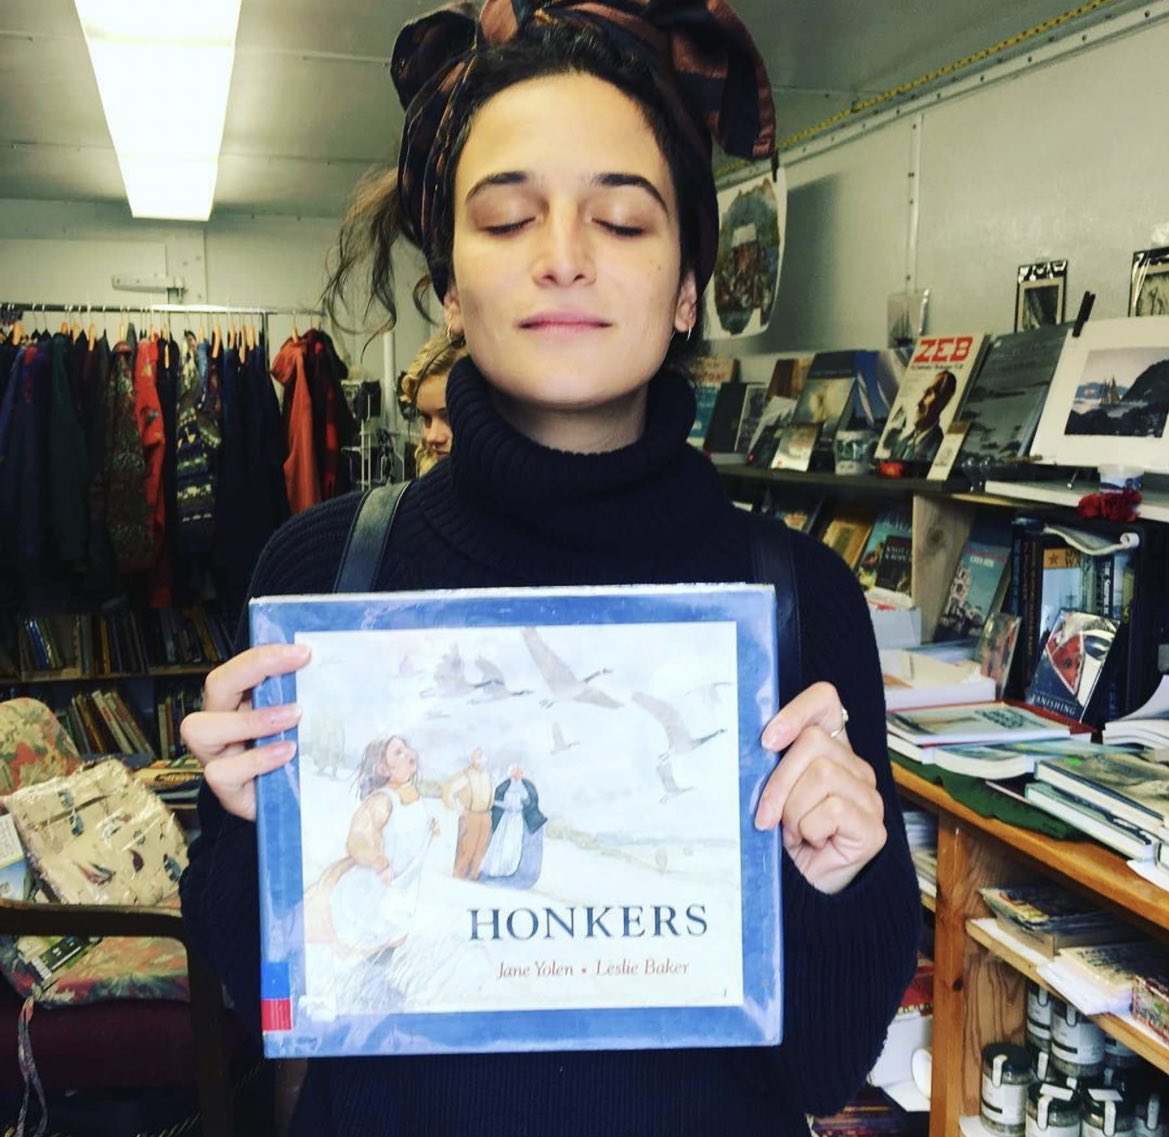 Jenny Slate reads “Honkers” by @JaneYolen #BookRecosFromCelebs #readmore #read #bookrecos #book #books #reading #author #booktwitter #jennyslate #honkers #janeyolen #childrensbooks #childrensbook #bigmouth #bobsburgers #obviouschild #zootopia #womenwhoread